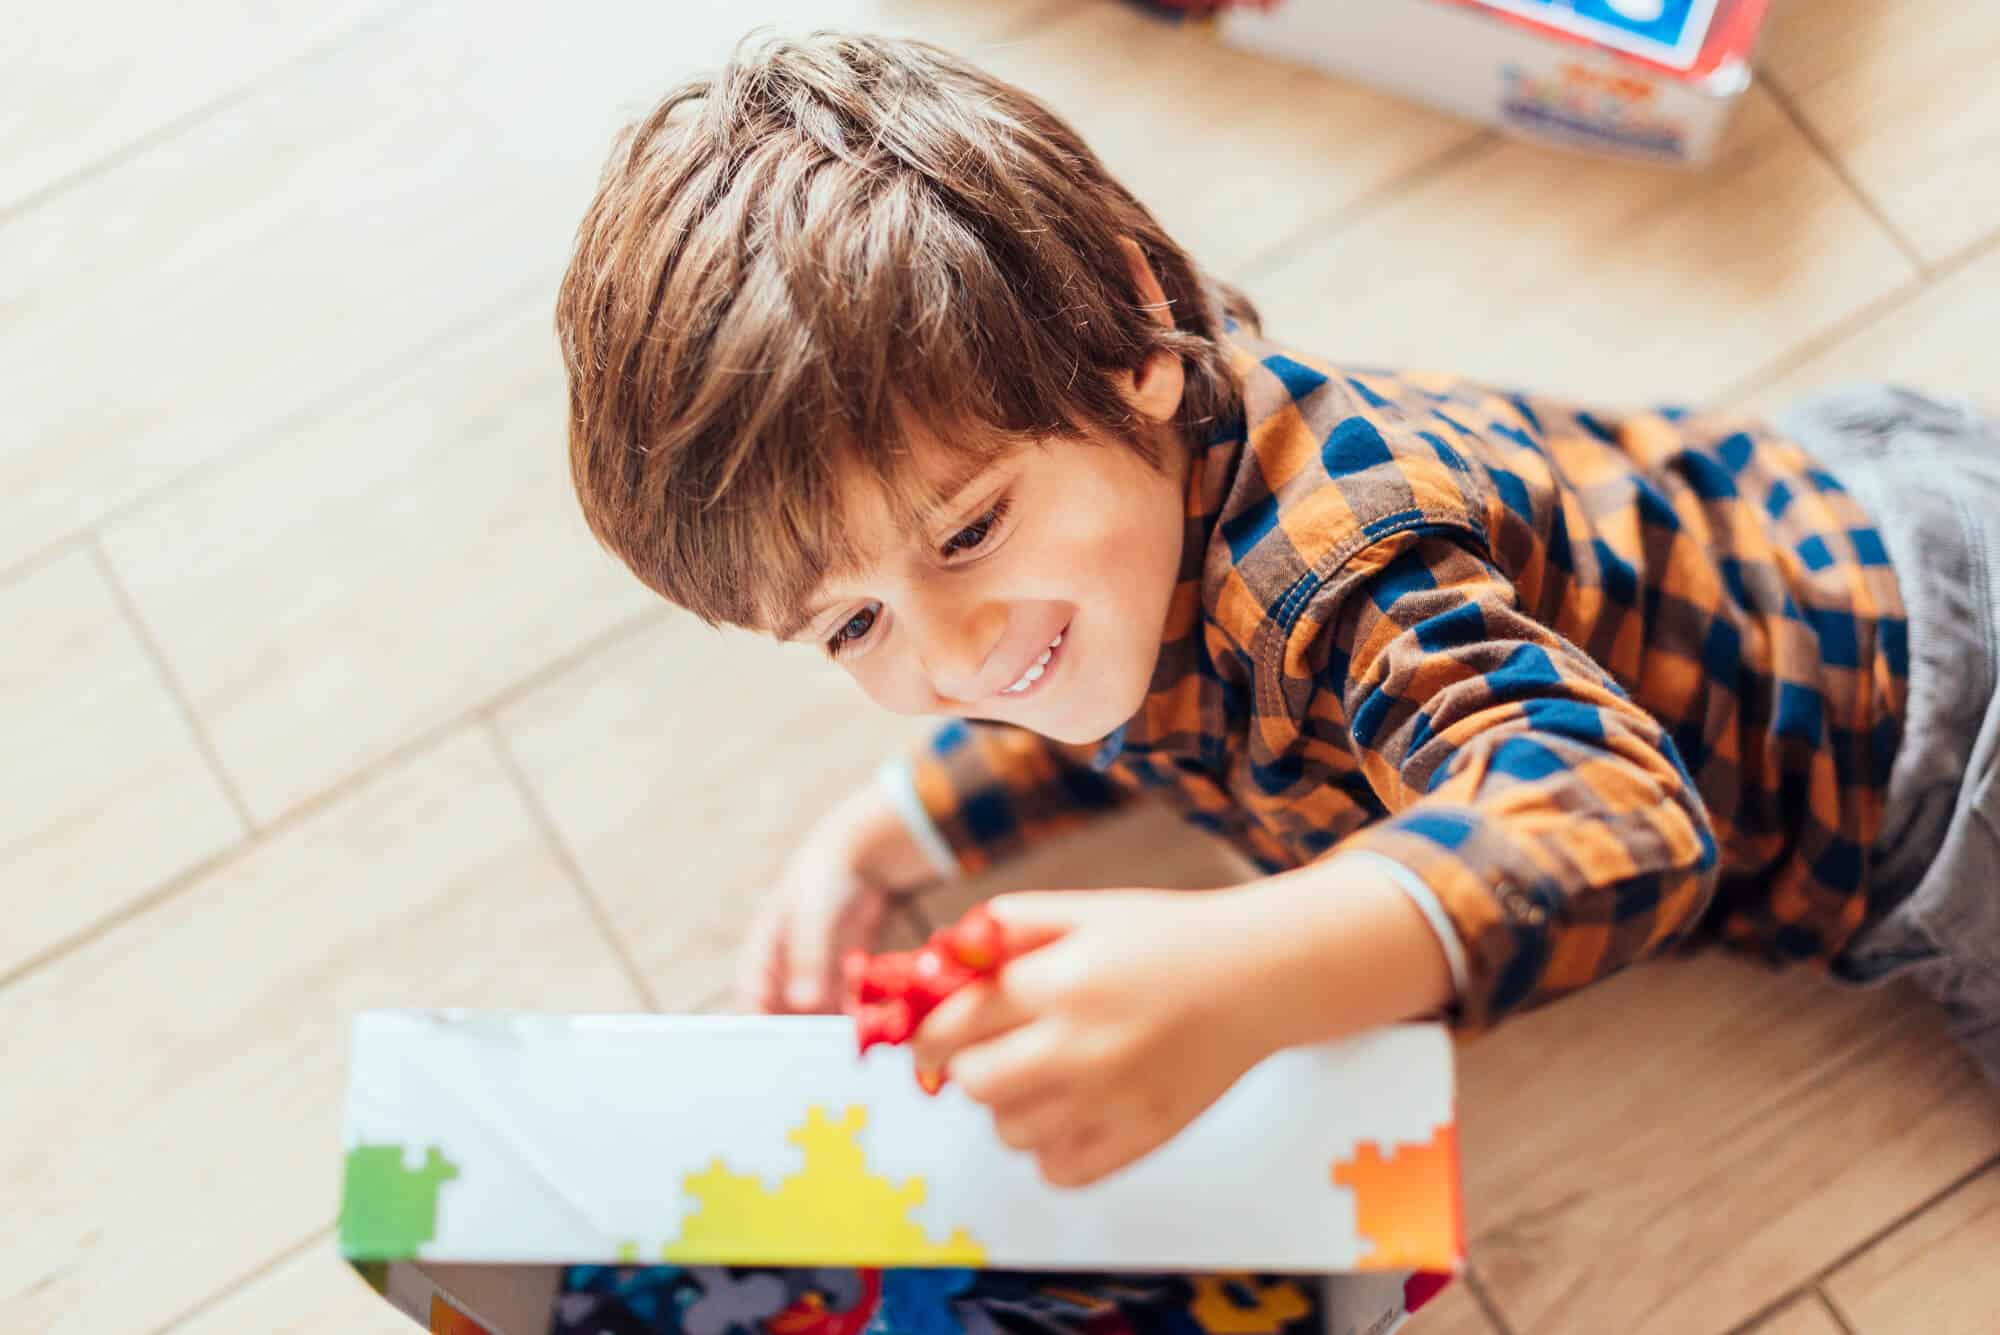 9 Epic Skills Kids Learn With Meaningful Playtime (and how you can help)